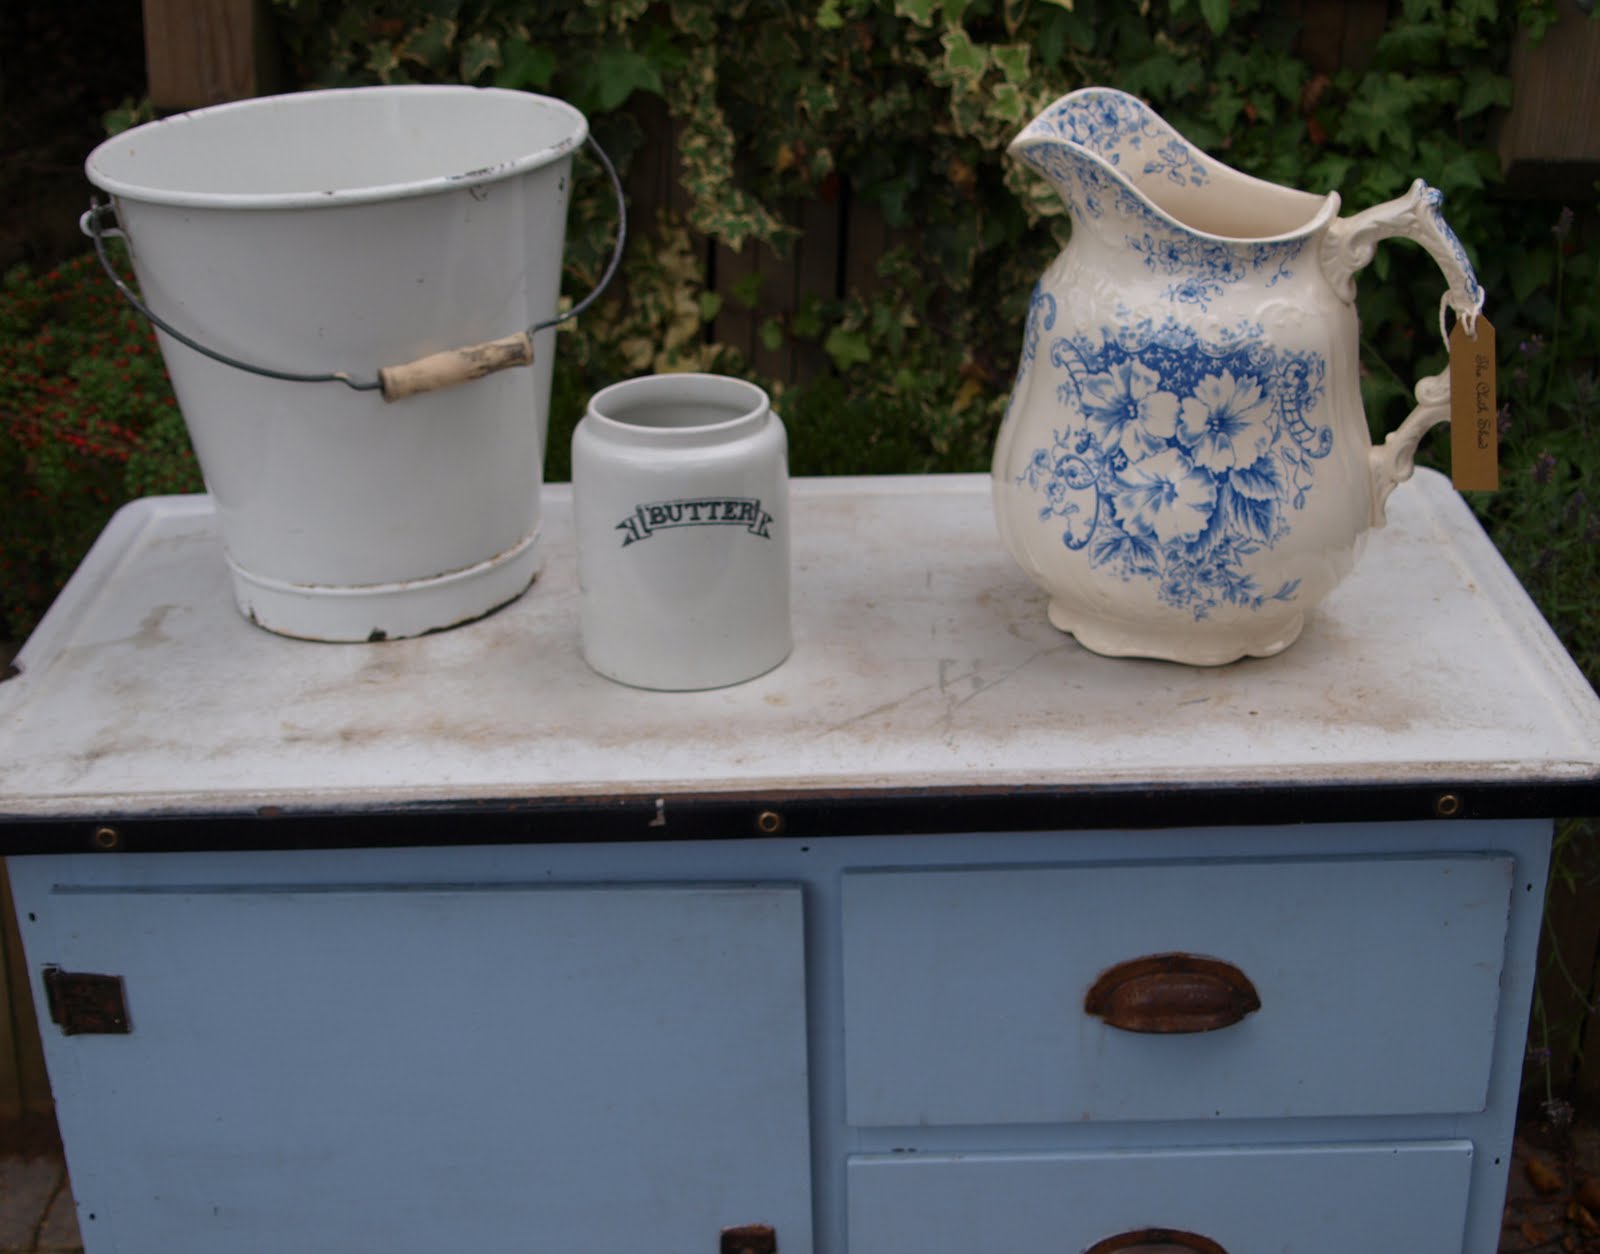 This small kitchen dresser base with battered enamel top would be a 